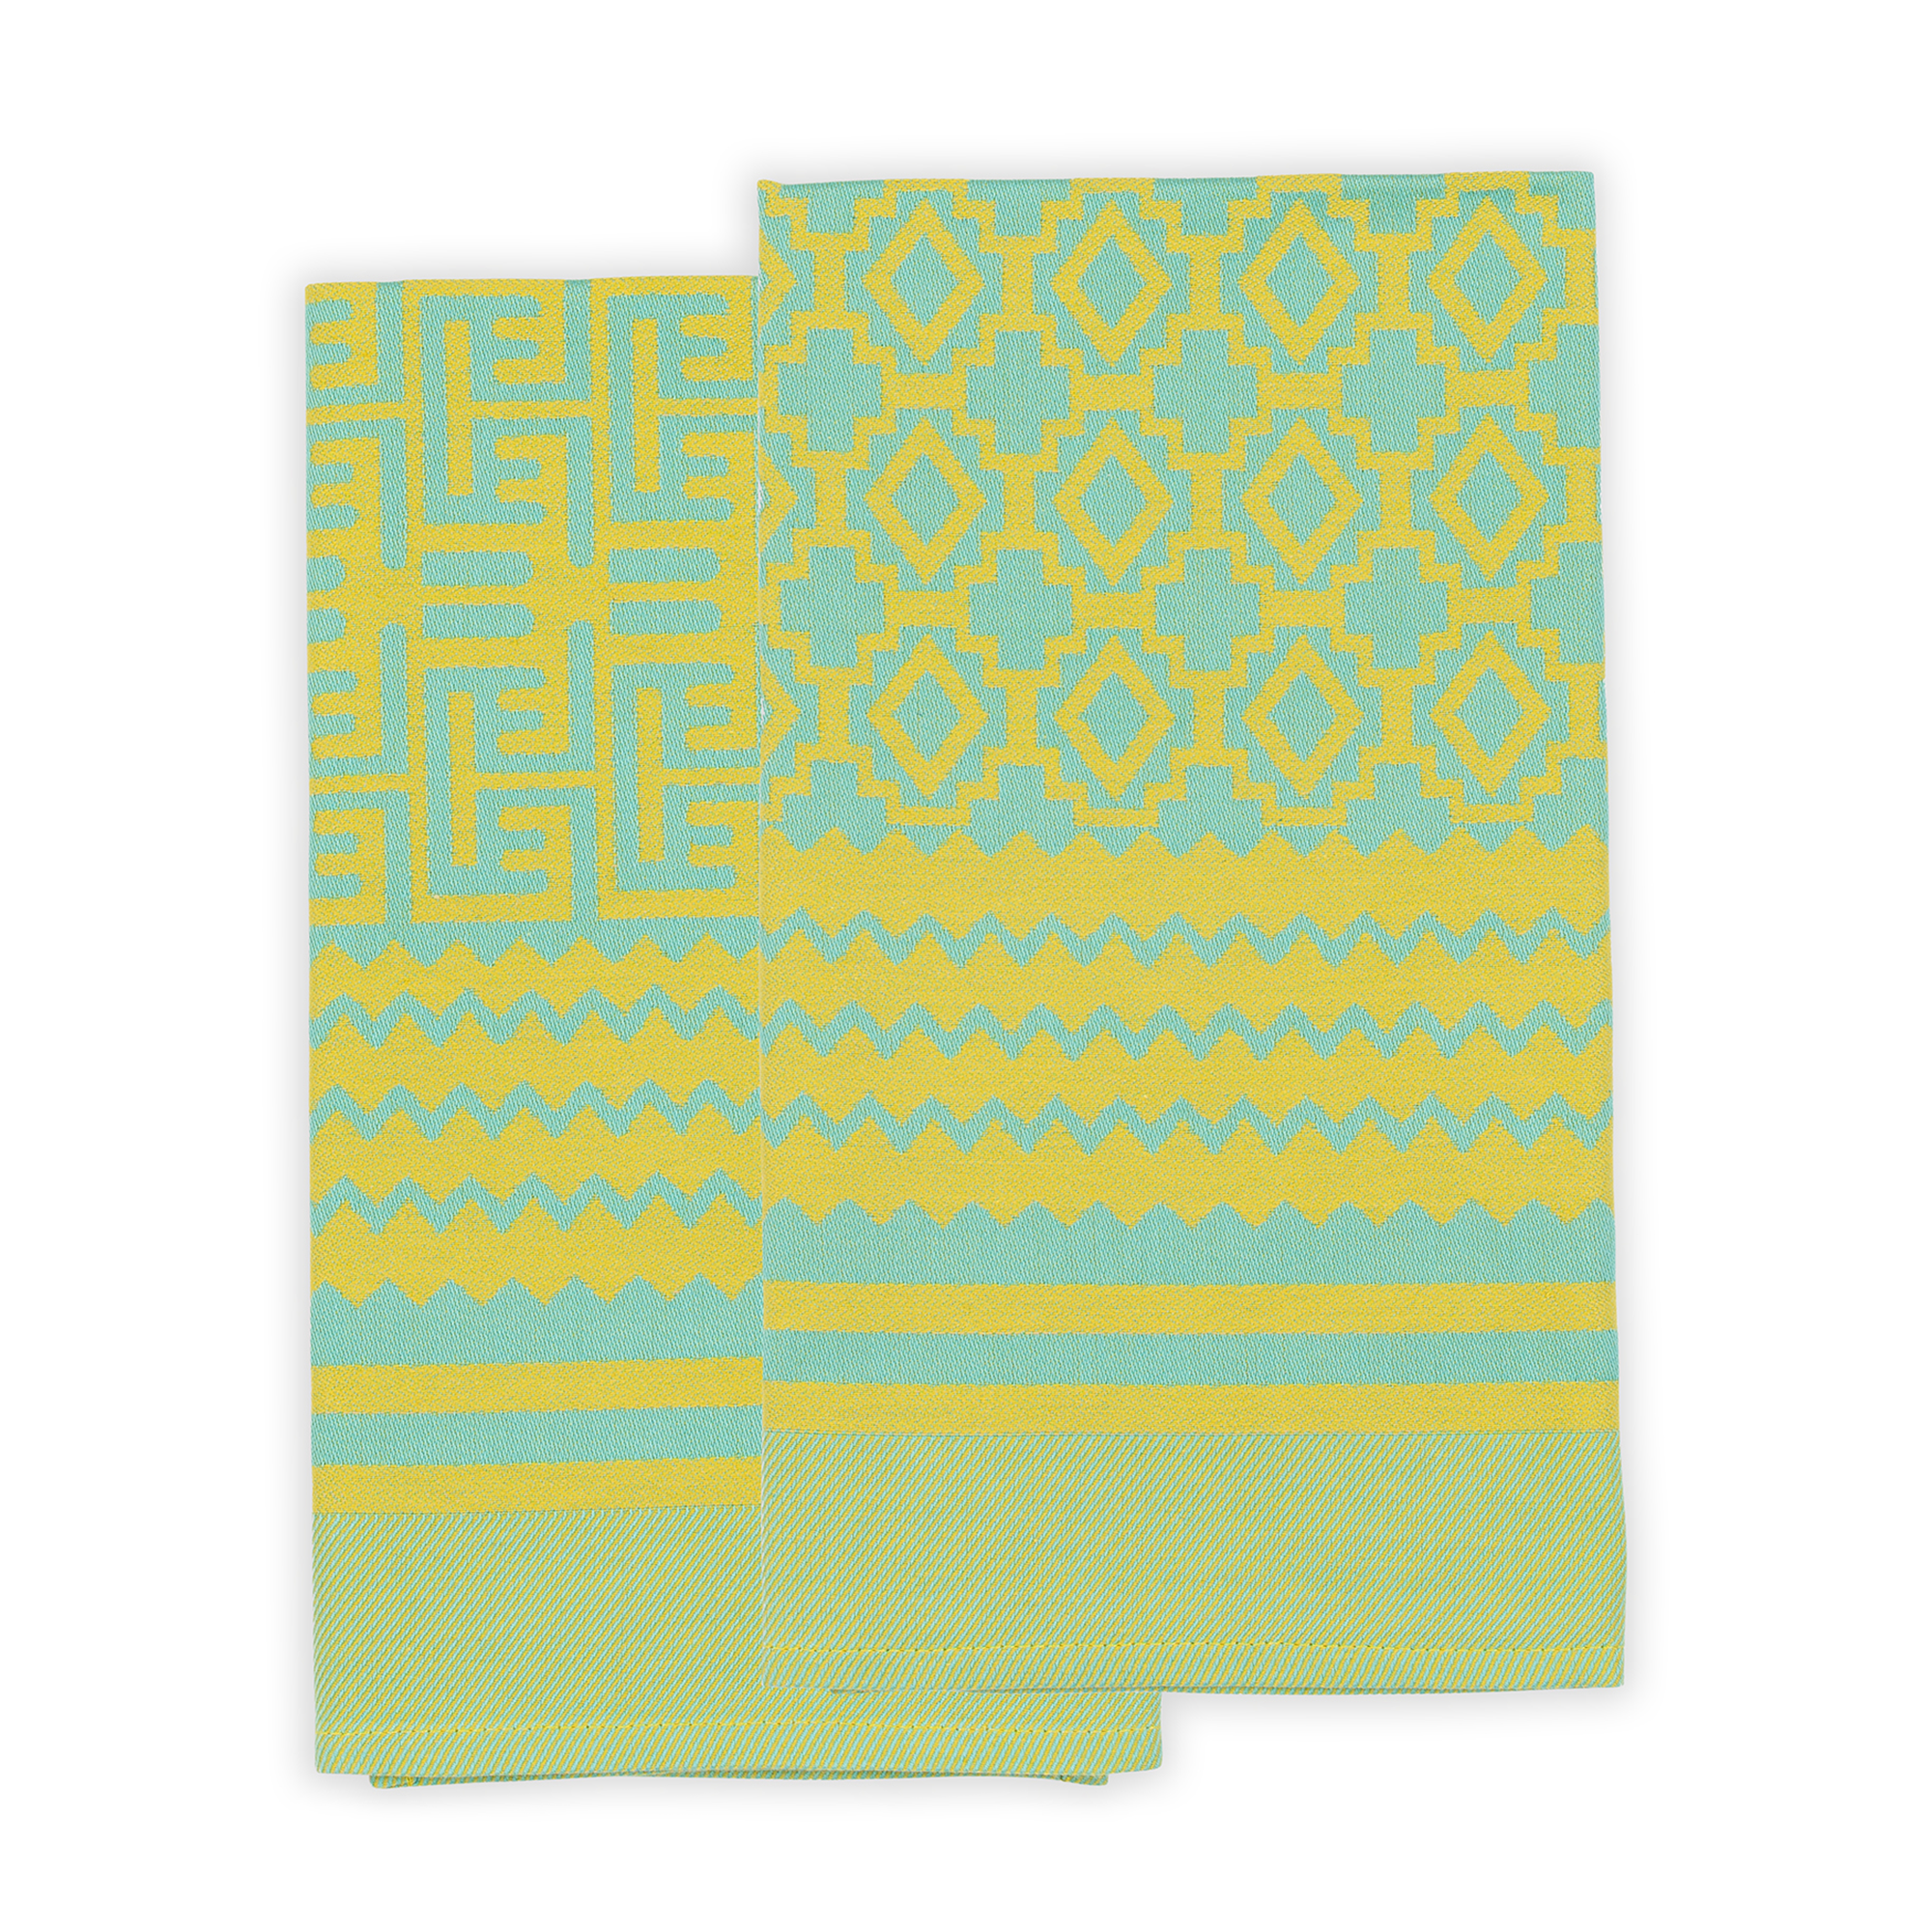 Unique tea towels inspired by Africa's rich culture, jacquard woven from 100% African cotton. Featuring diverse African patterns including geometric designs in yellow and blue, these dish towels add vibrancy to your kitchen and intrigue guests.